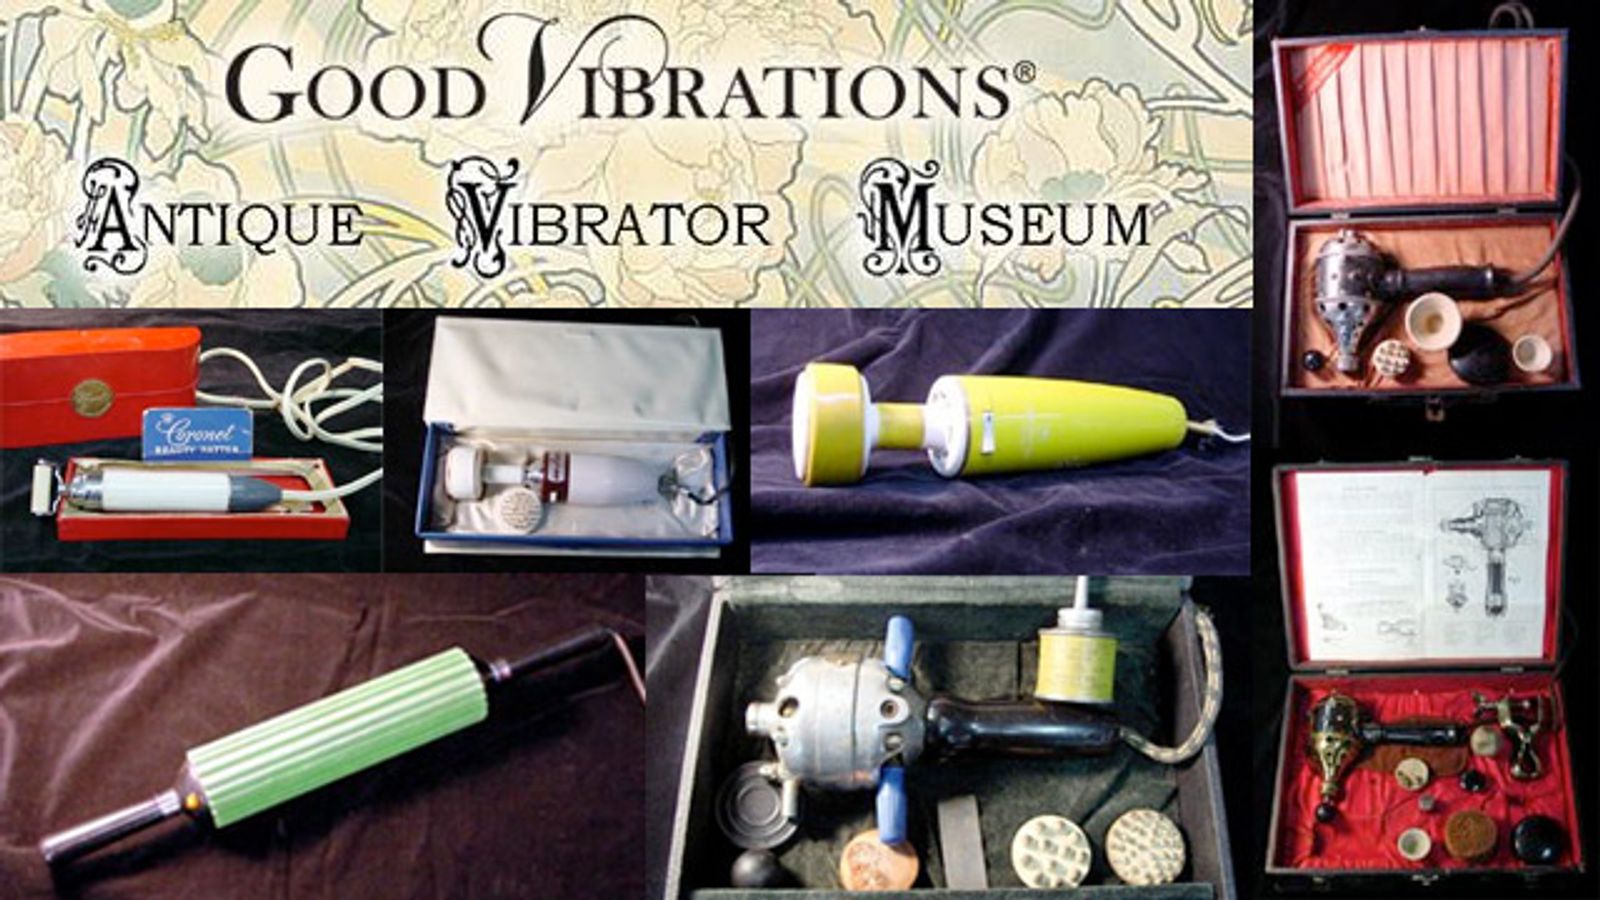 Good Vibrations’ Antique Vibrator Collection in ‘Hysteria’